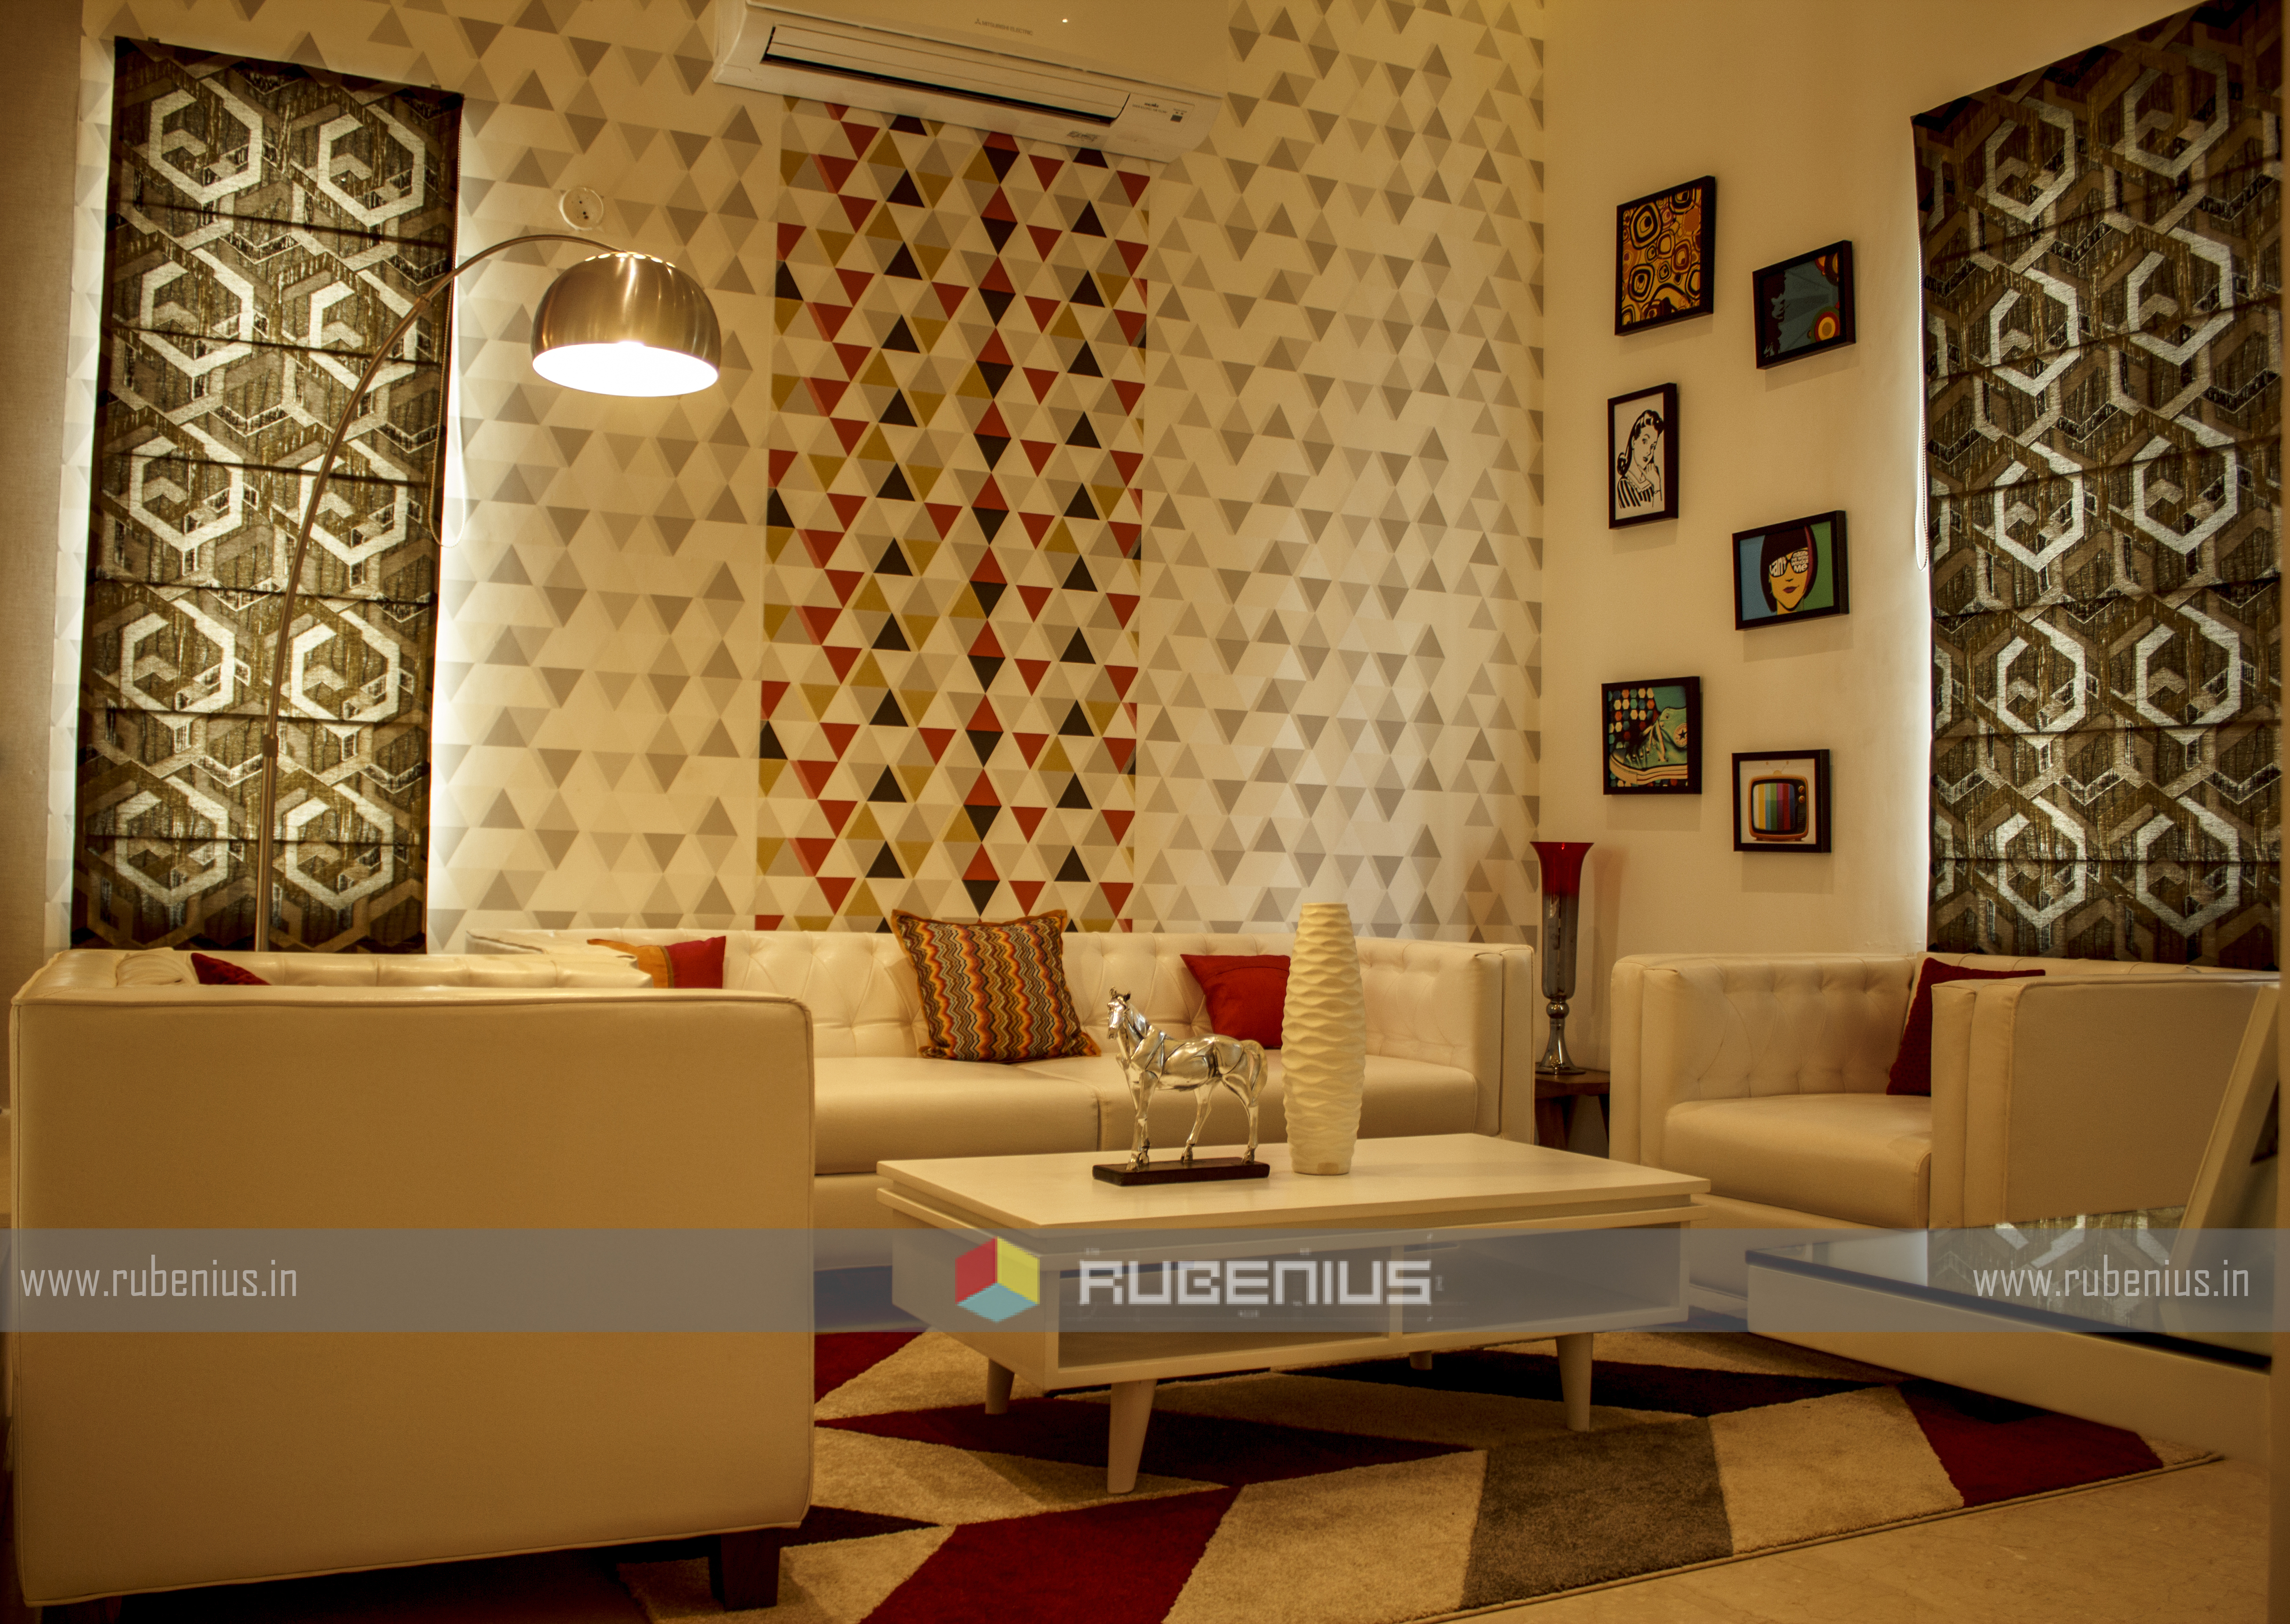 Design of a Beautiful Living Room by Rubenius